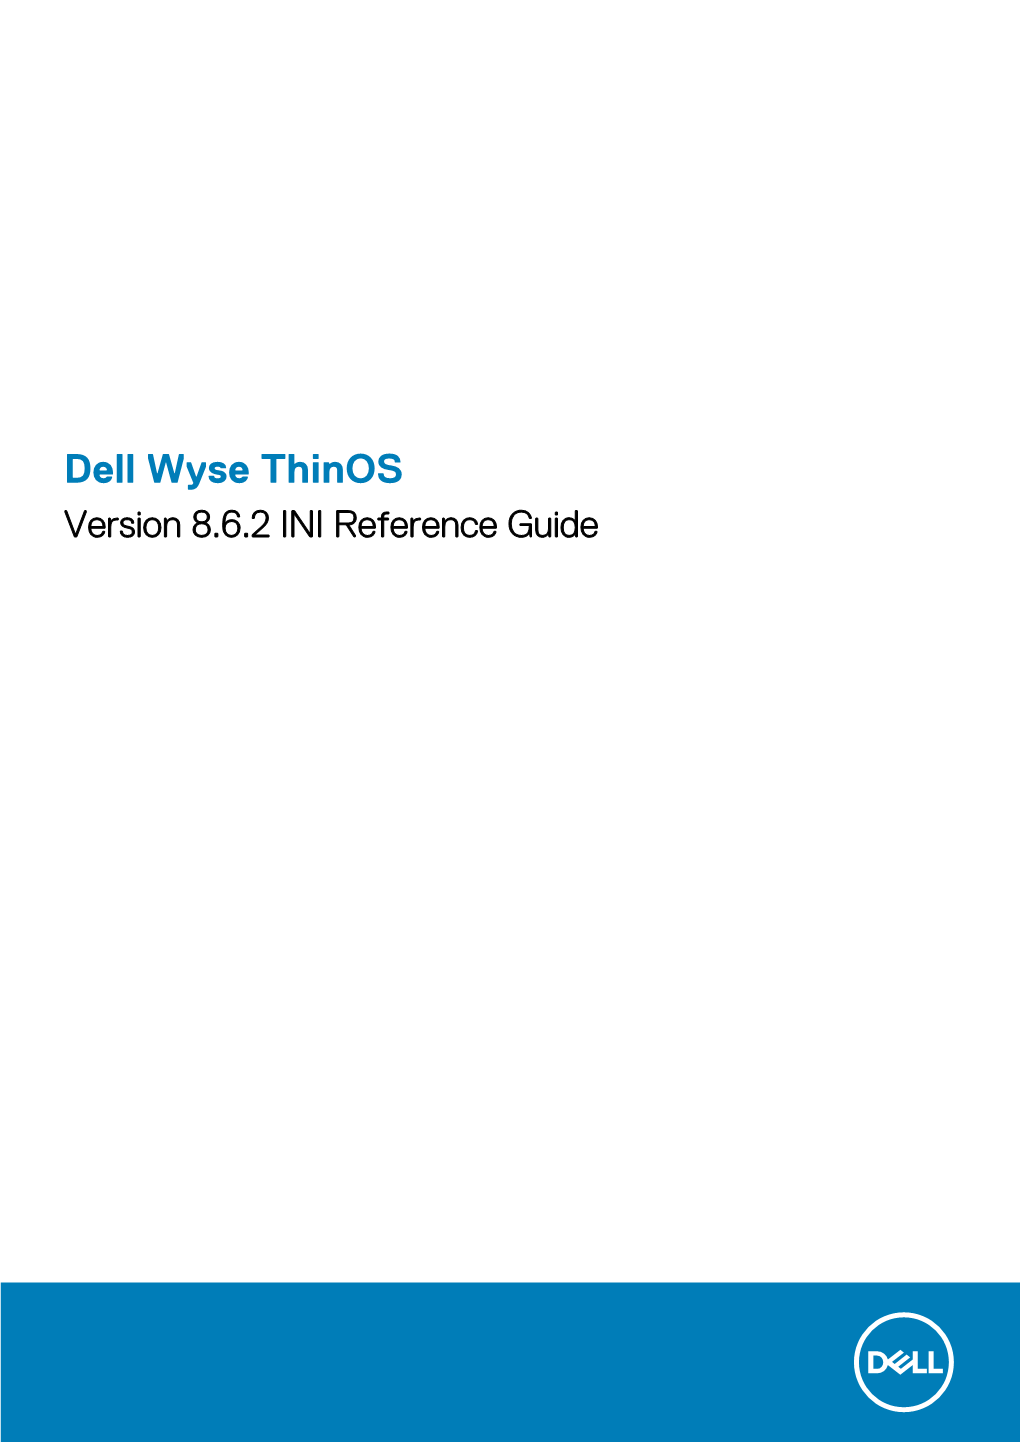 Dell Wyse Thinos Version 8.6.2 INI Reference Guide Notes, Cautions, and Warnings